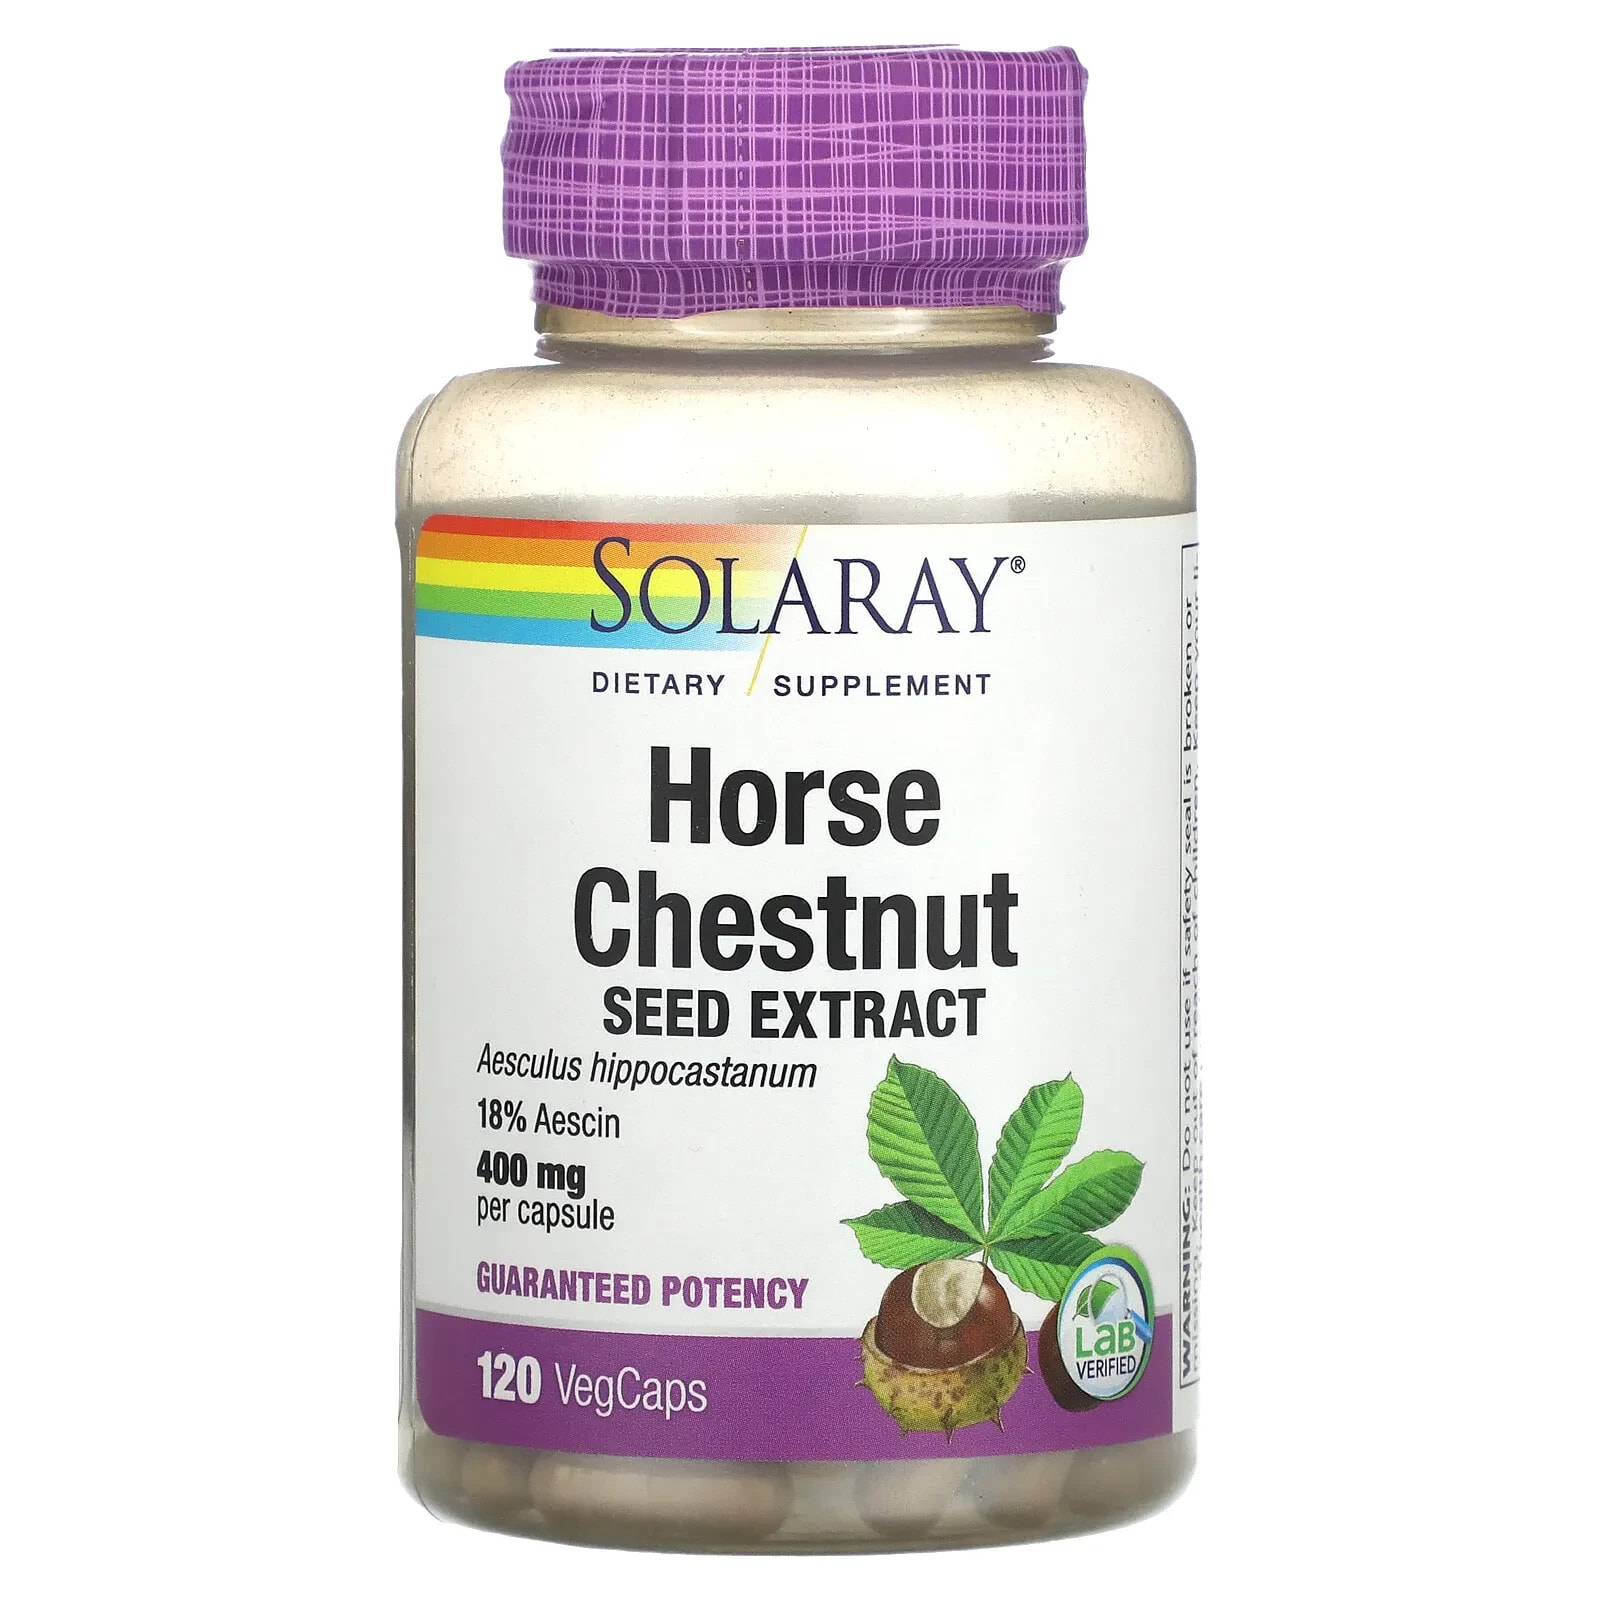 Horse Chestnut Seed Extract, 400 mg, 120 VegCaps